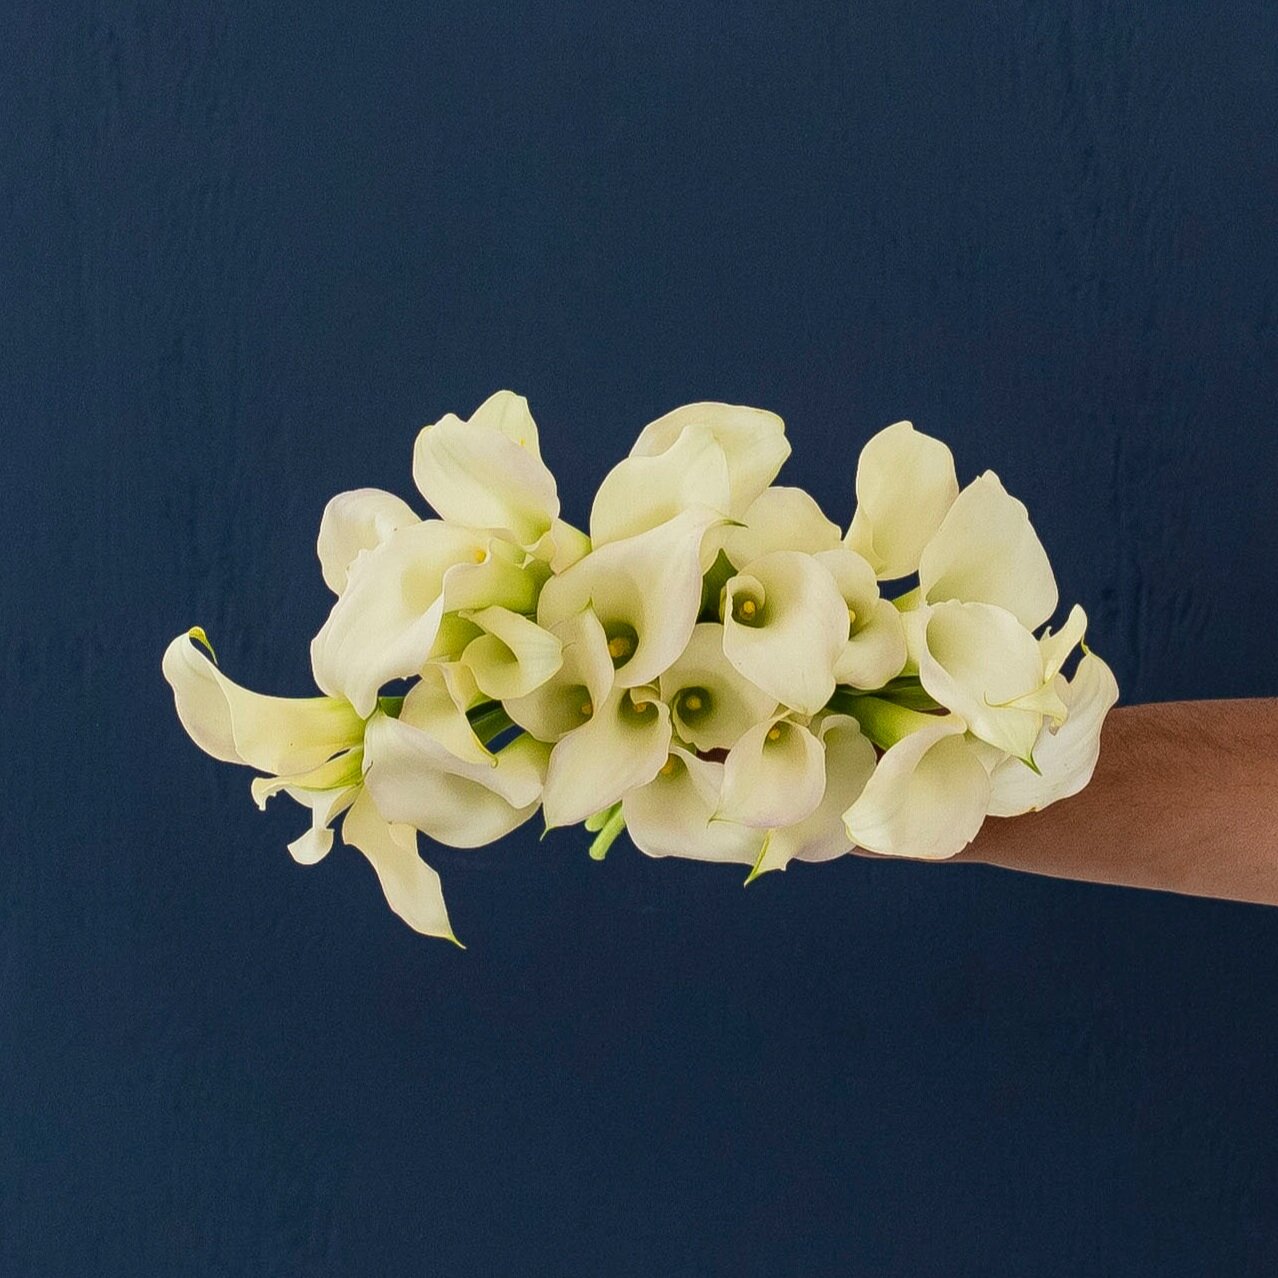 A bouquet of ivory calla lilies being held in front of a navy background